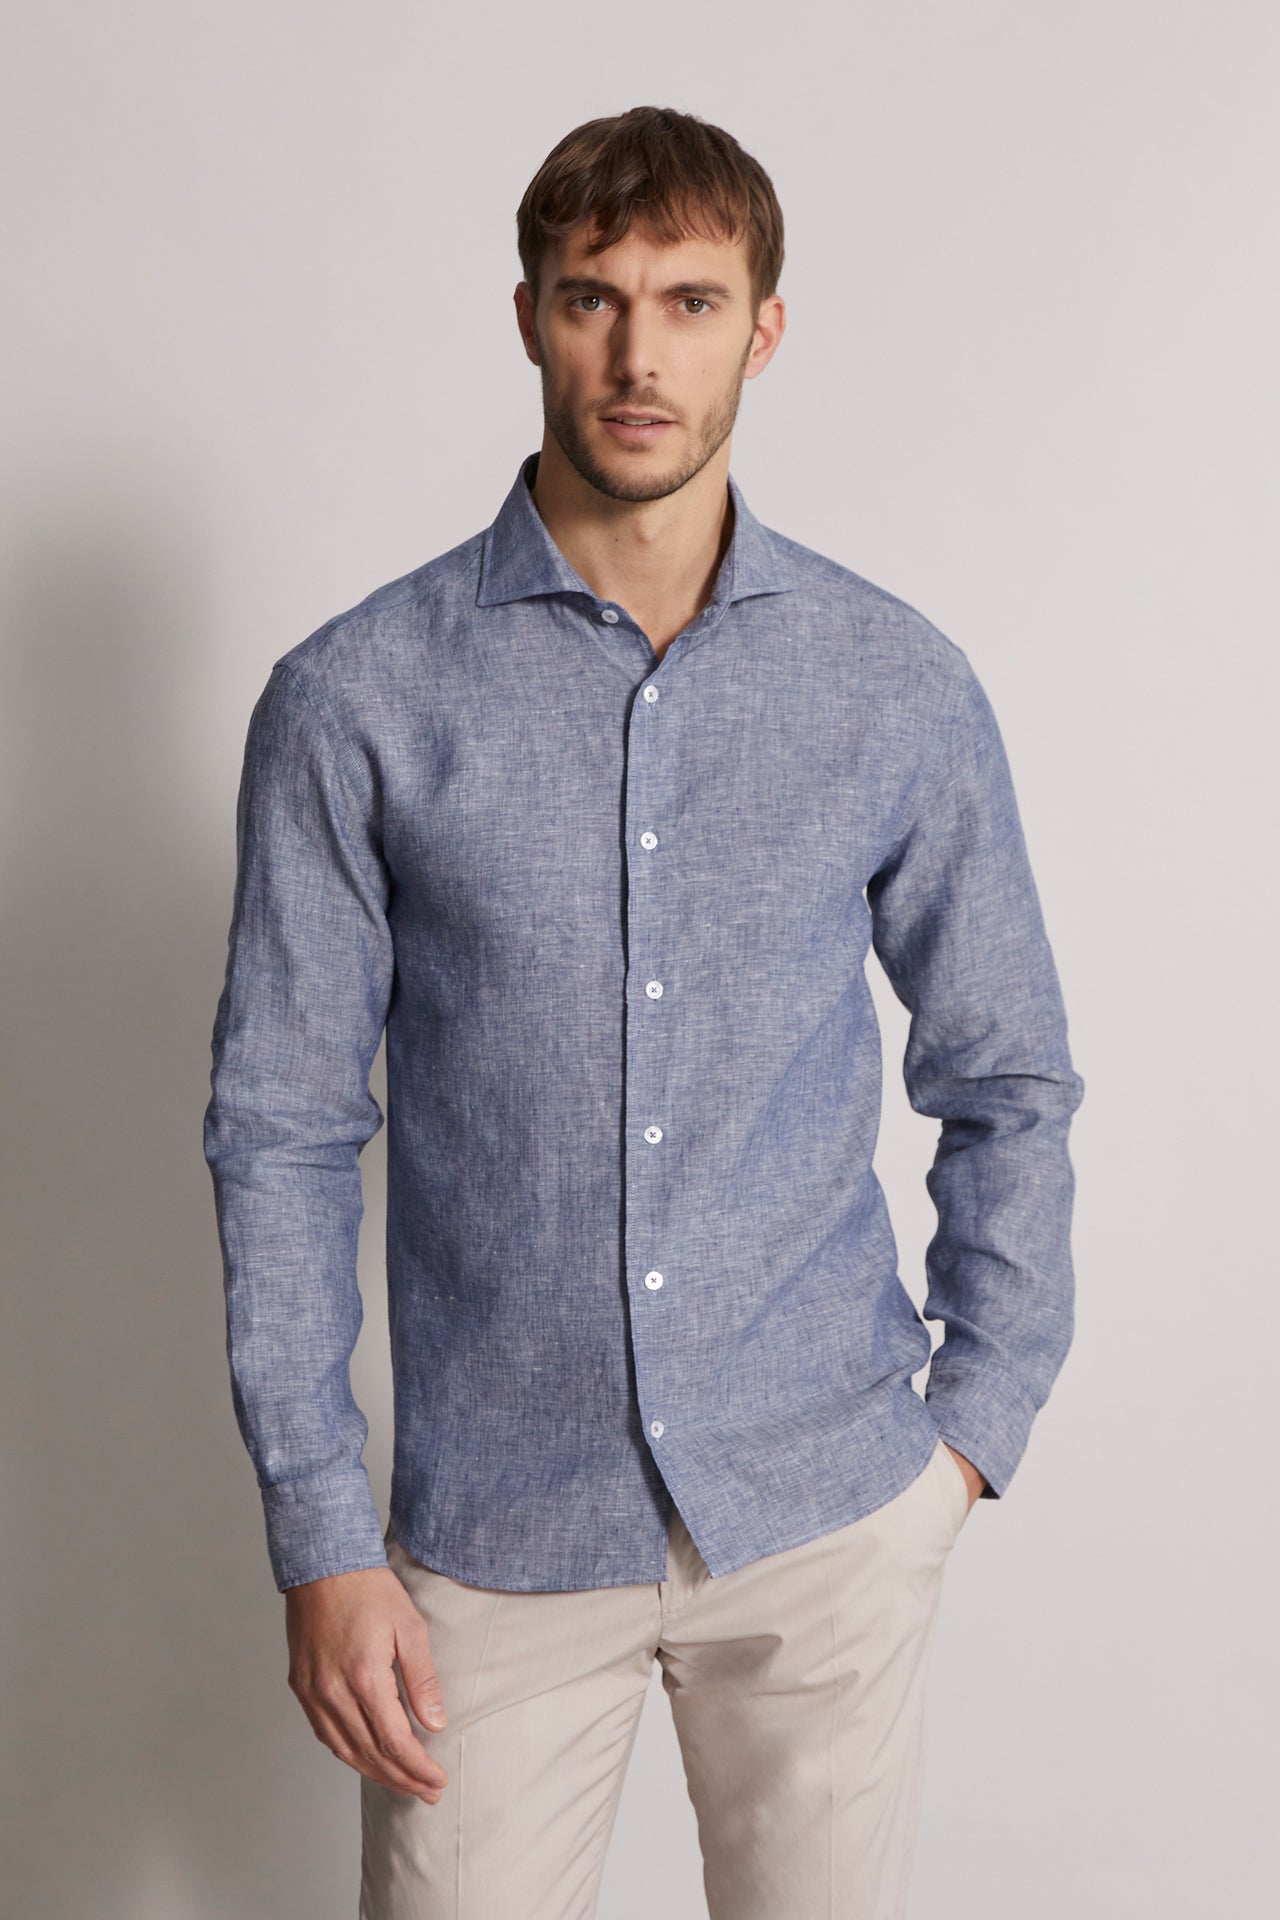 Roby shirt in linen denim fabric